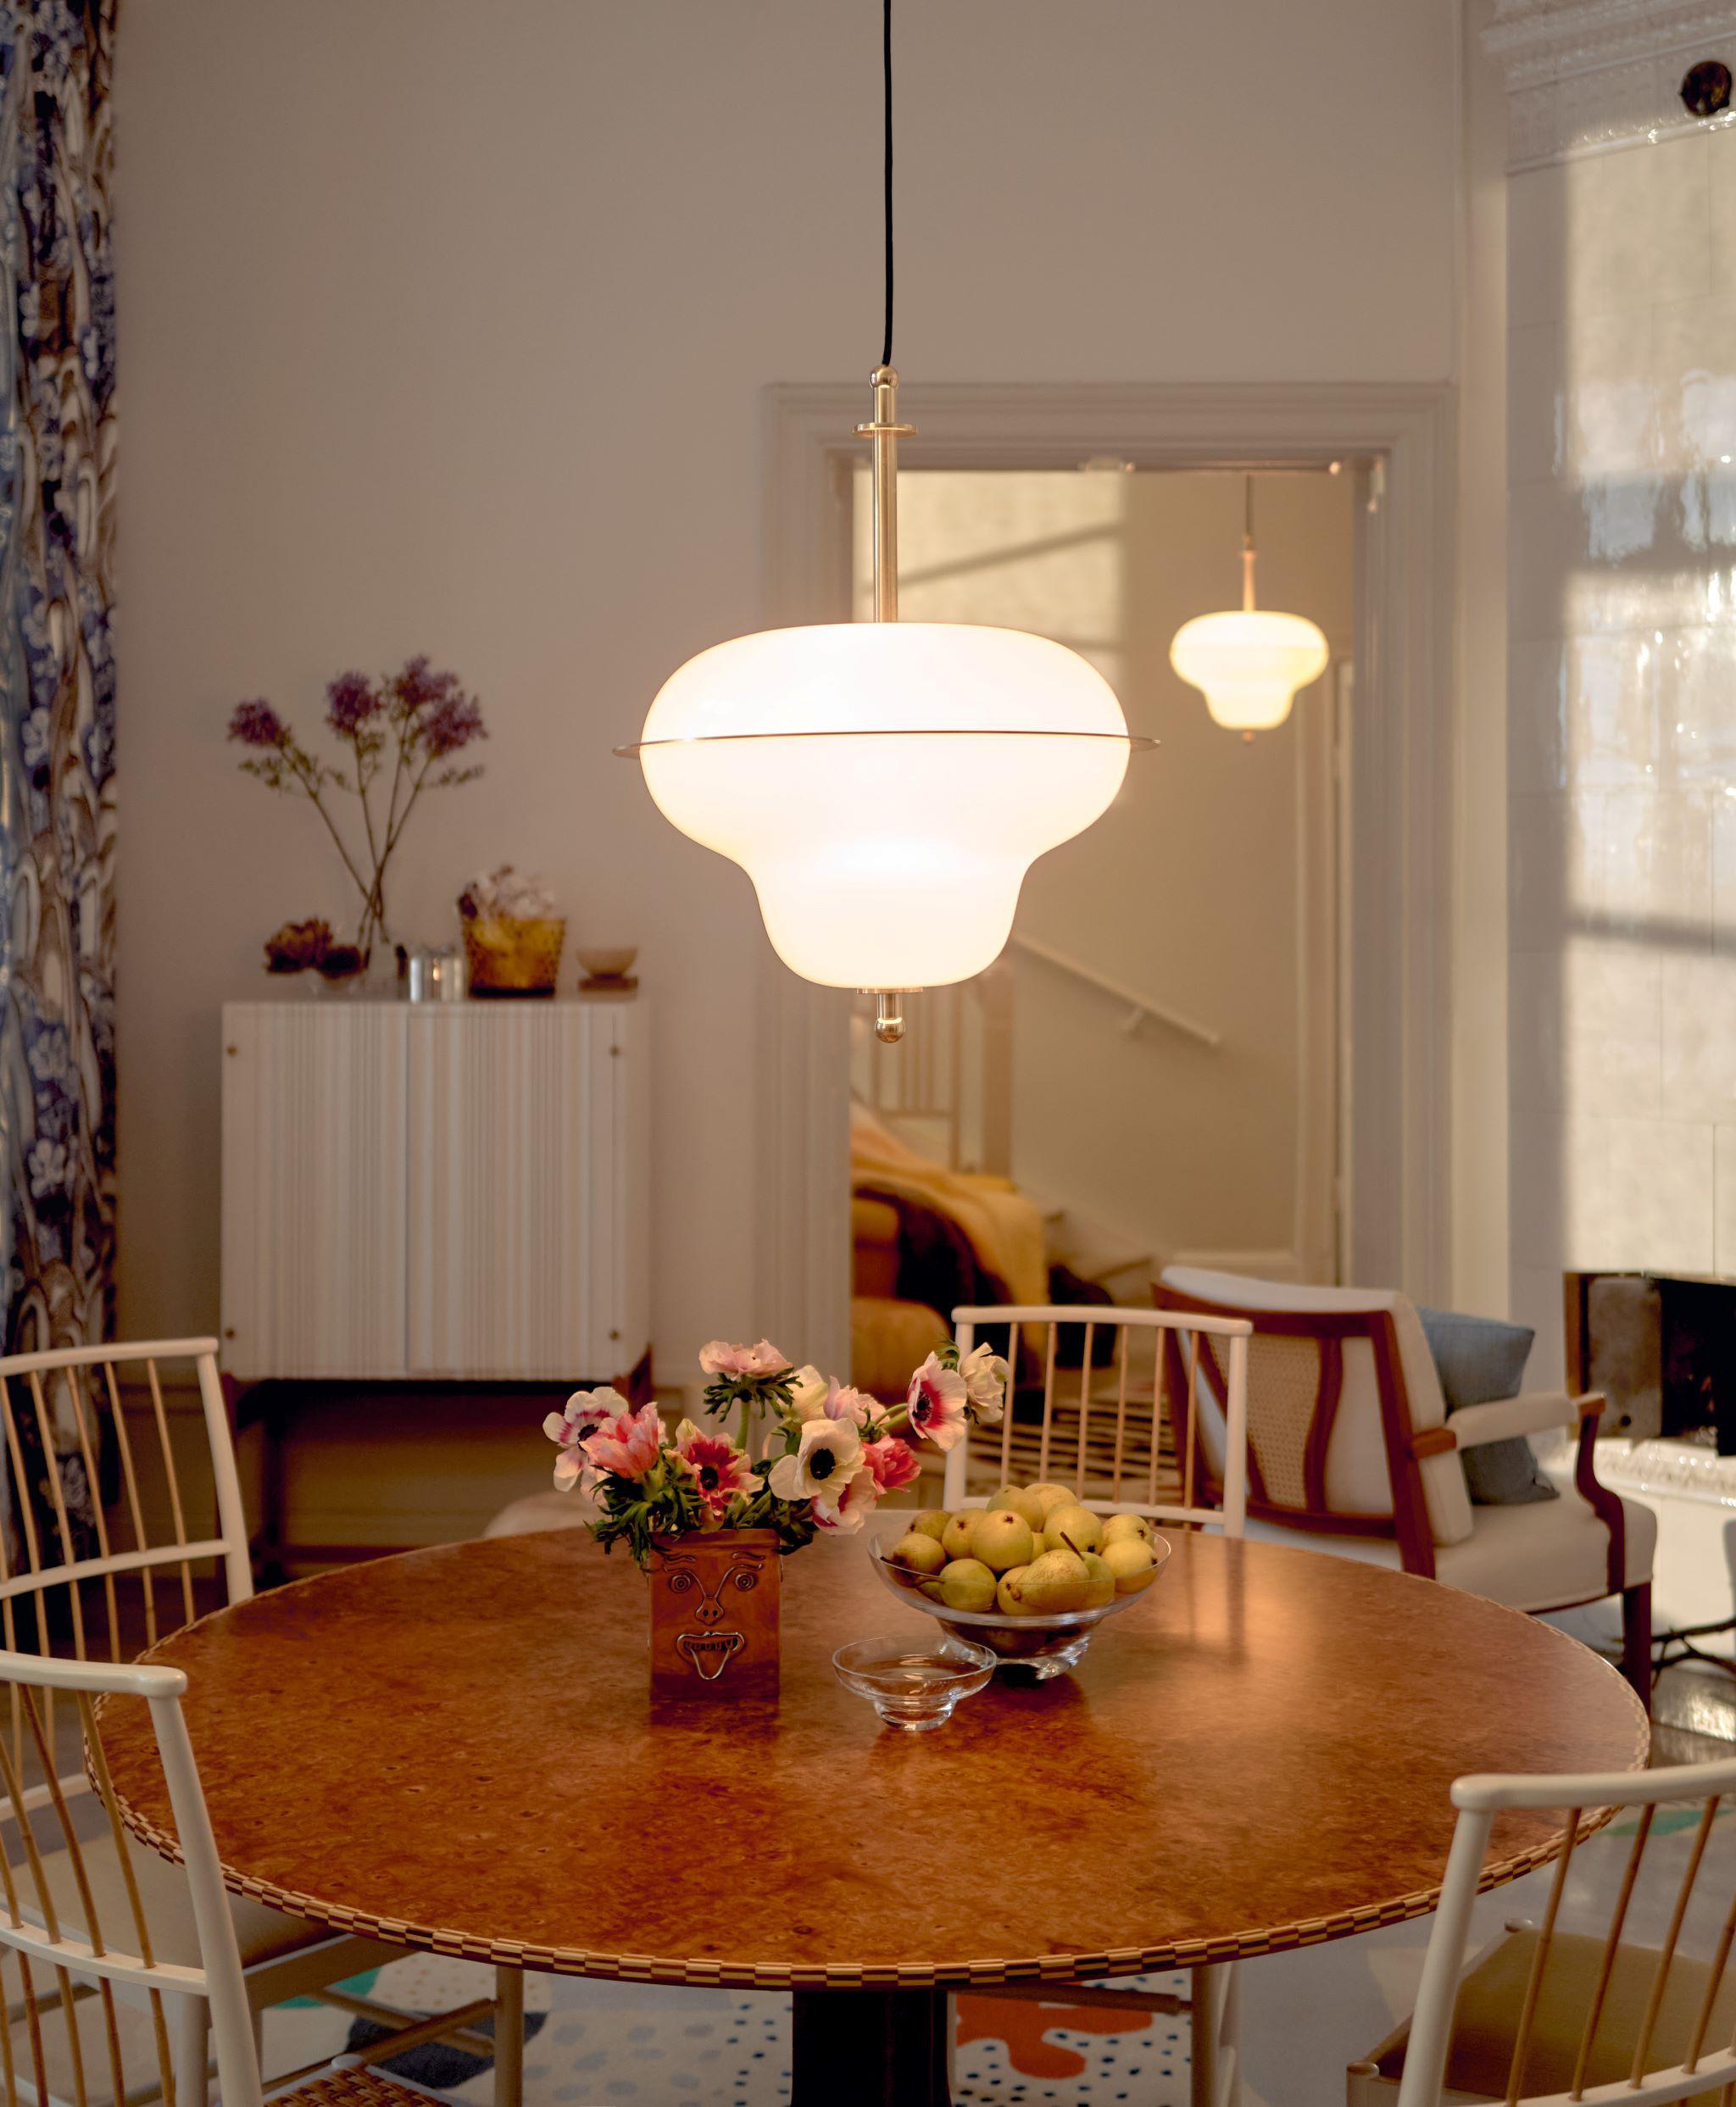 A room with a round table and chairs and a lamp hanging over the table.